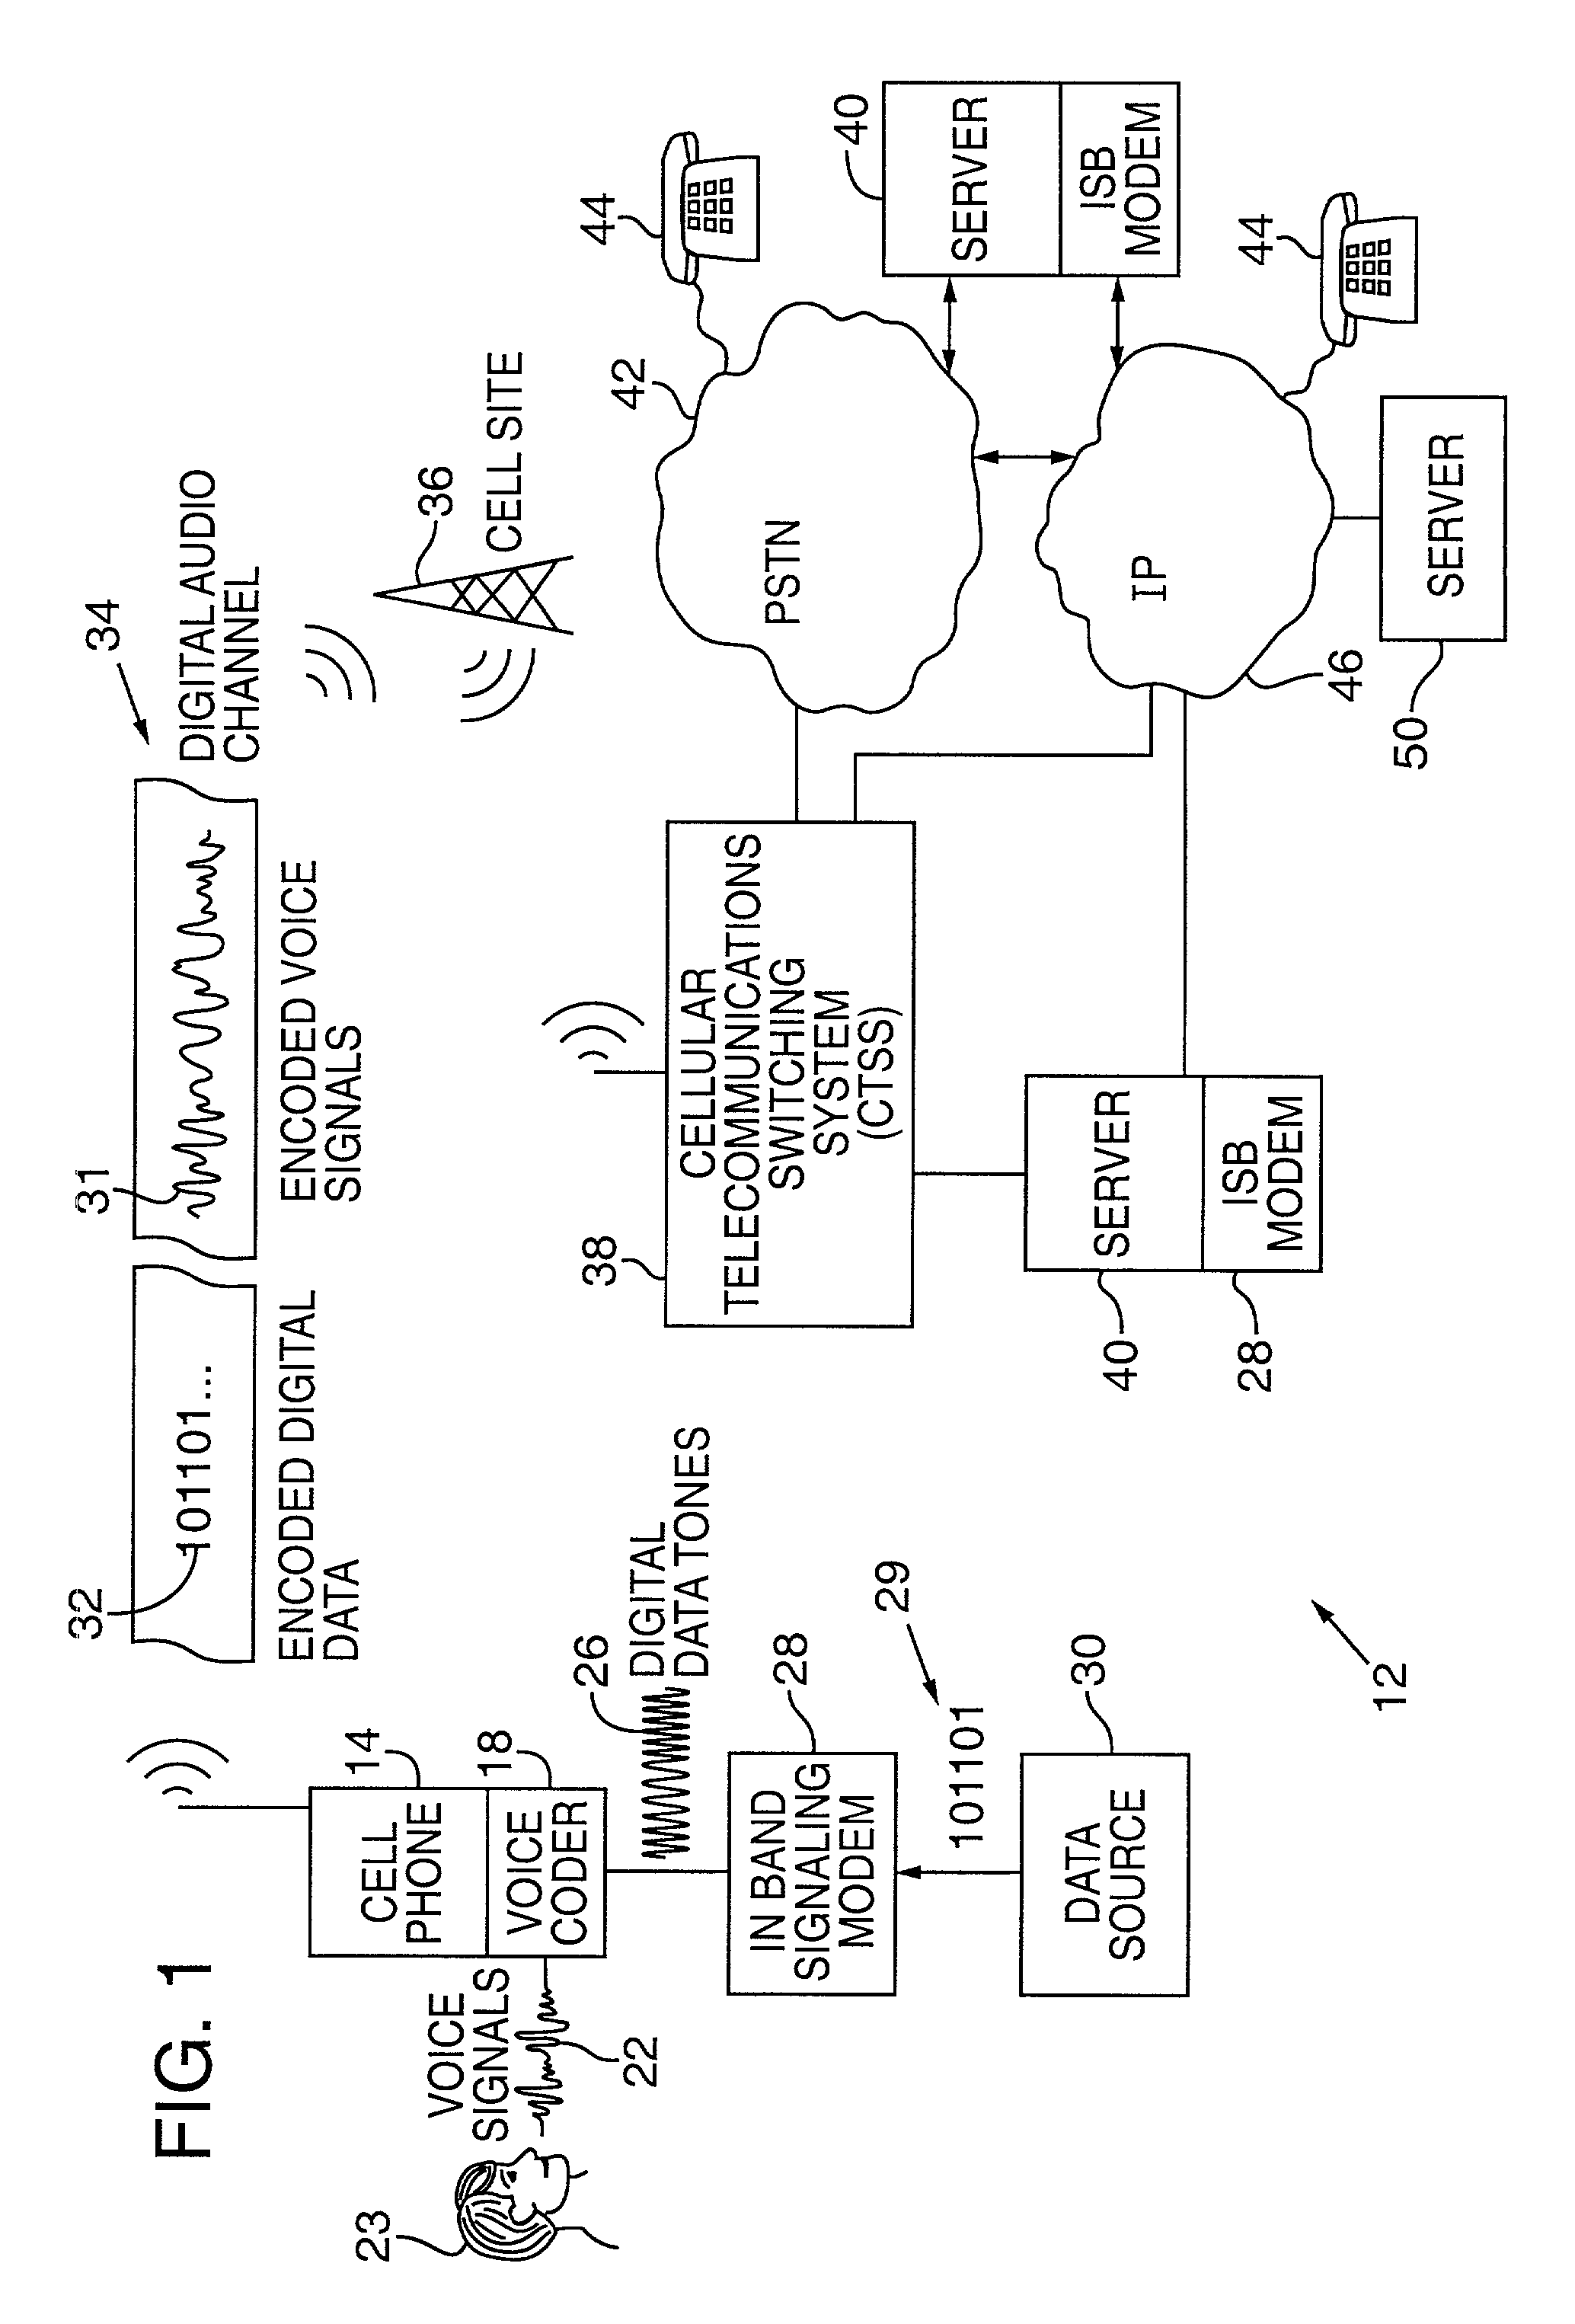 Cellular telephone having improved in-band signaling for data communications over digital wireless telecommunications networks